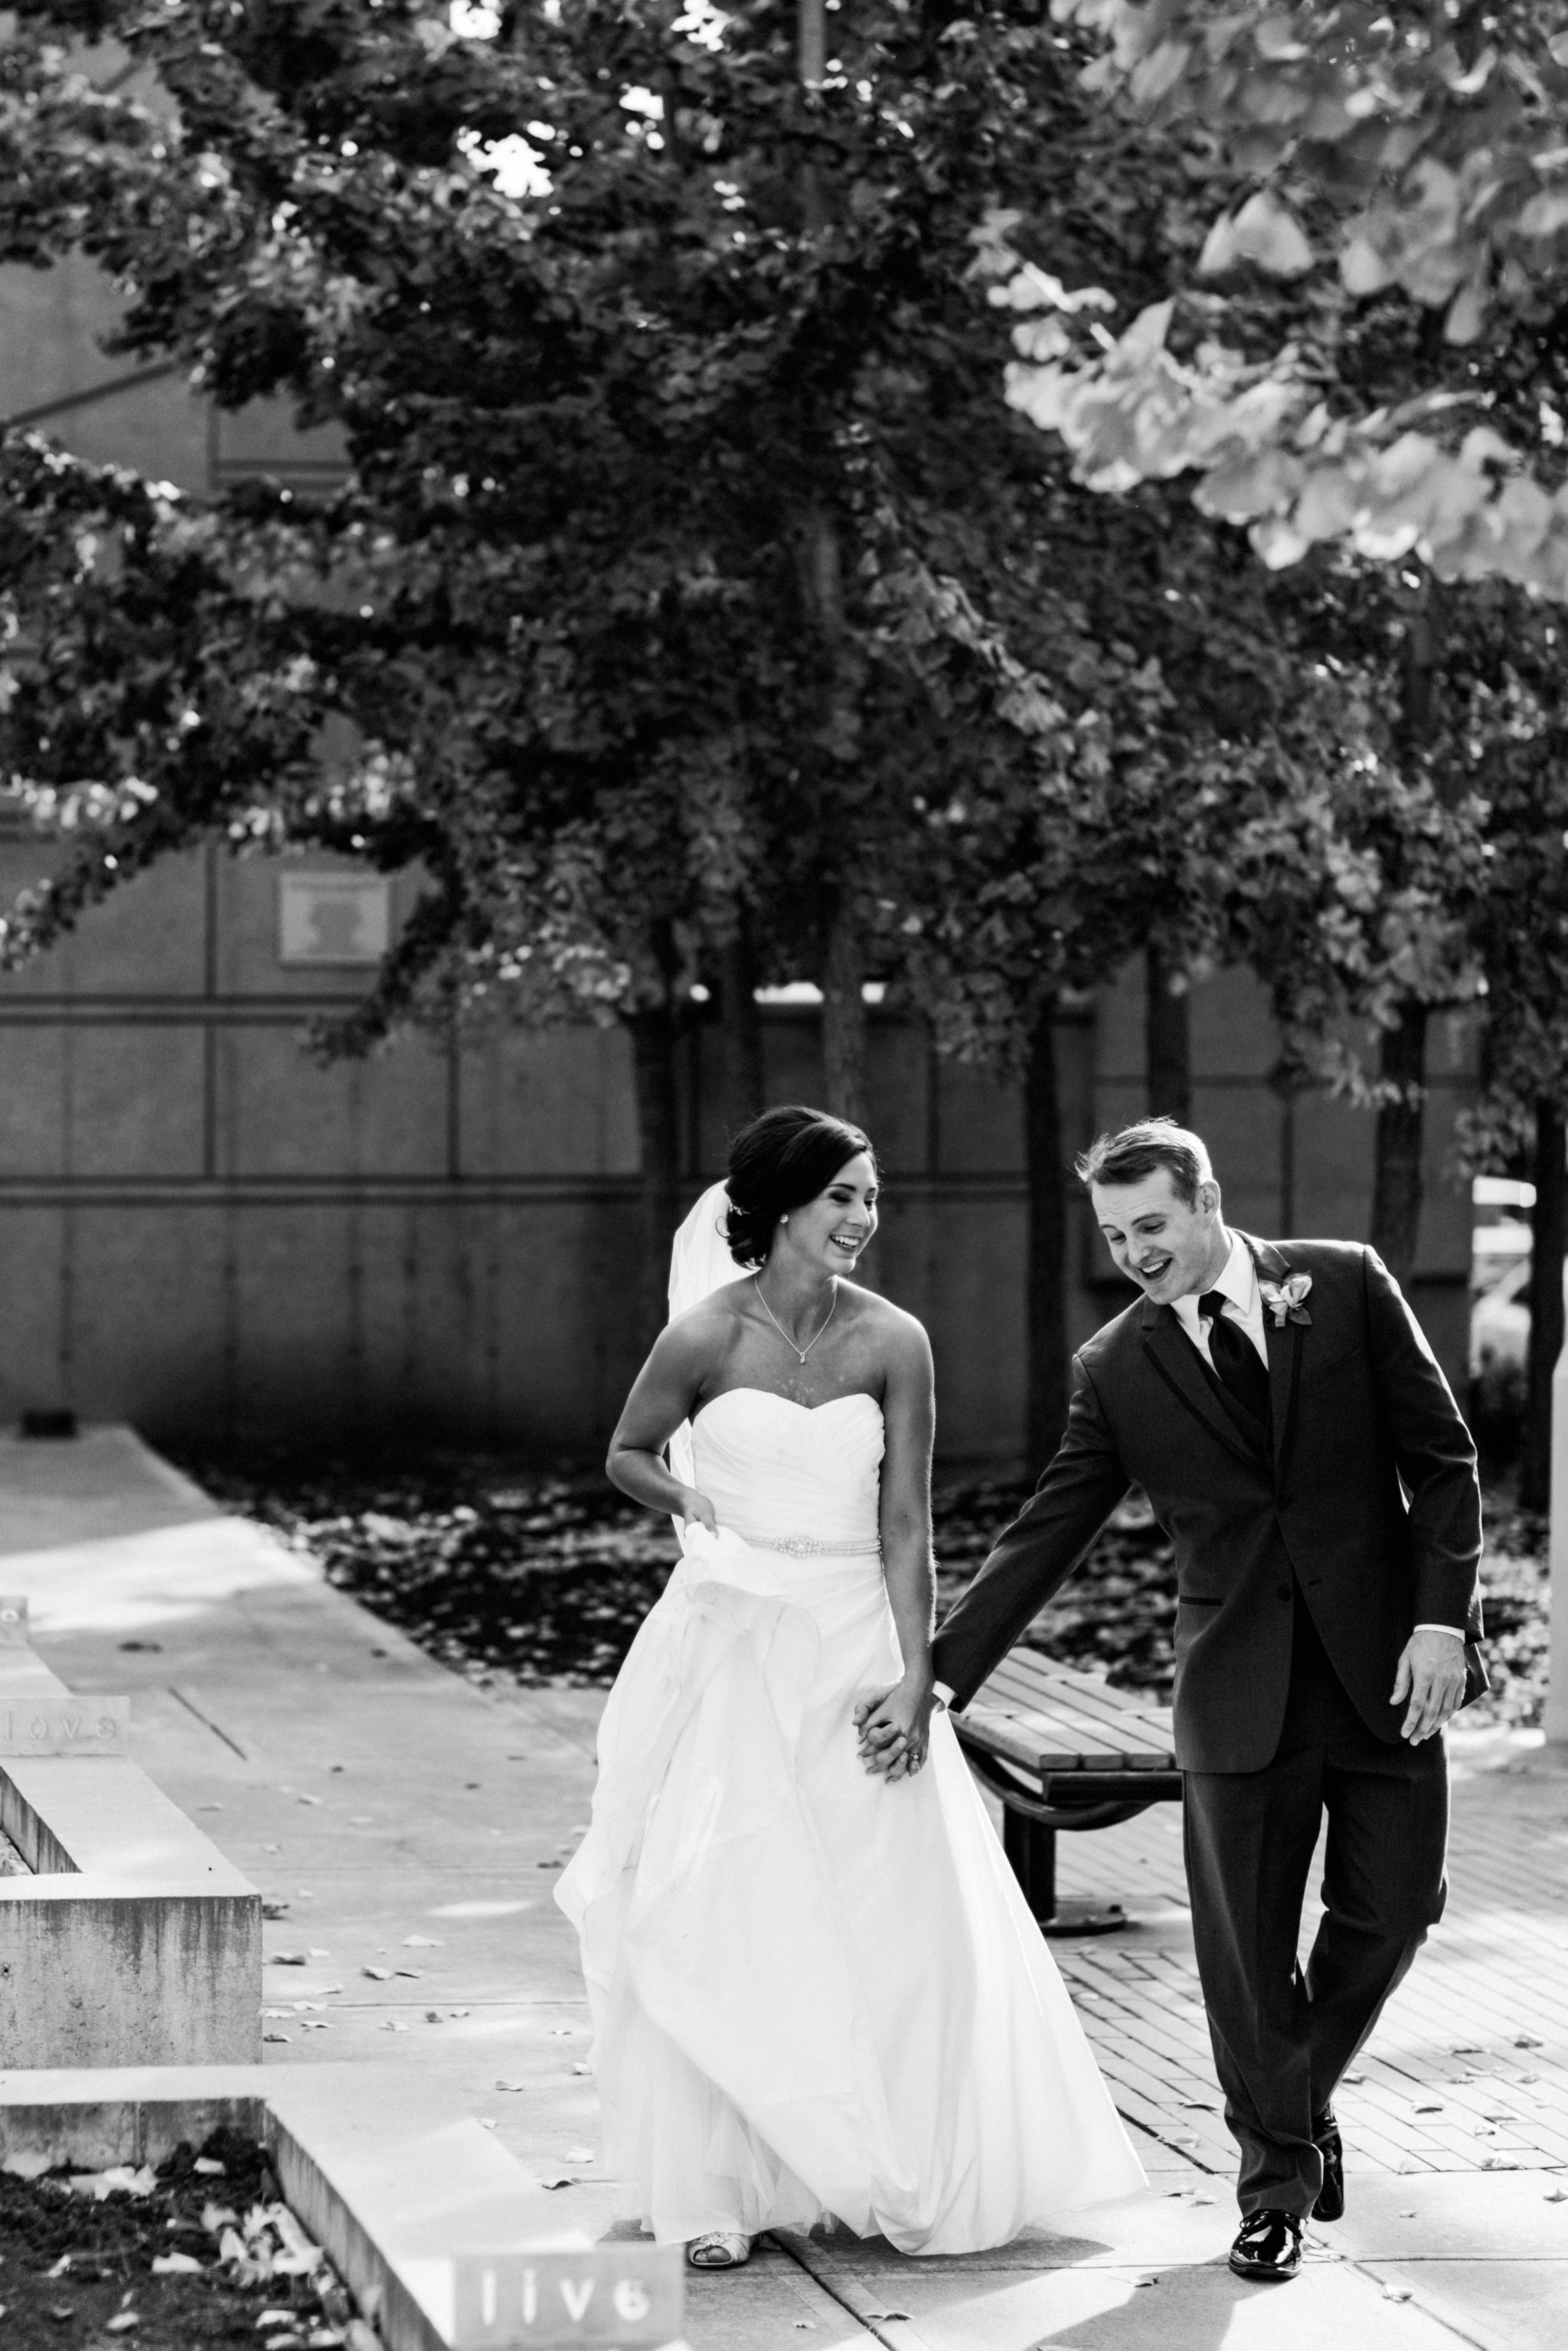 black and white | wedding | wedding photos | wedding photography | images by feliciathephotographer.com | Country Club Plaza | Kansas City | Unity Temple | Cancer Survivor Park | bride and groom portraits | candid | walking through park | hand holding | laughing bride | laughing groom | silly poses 